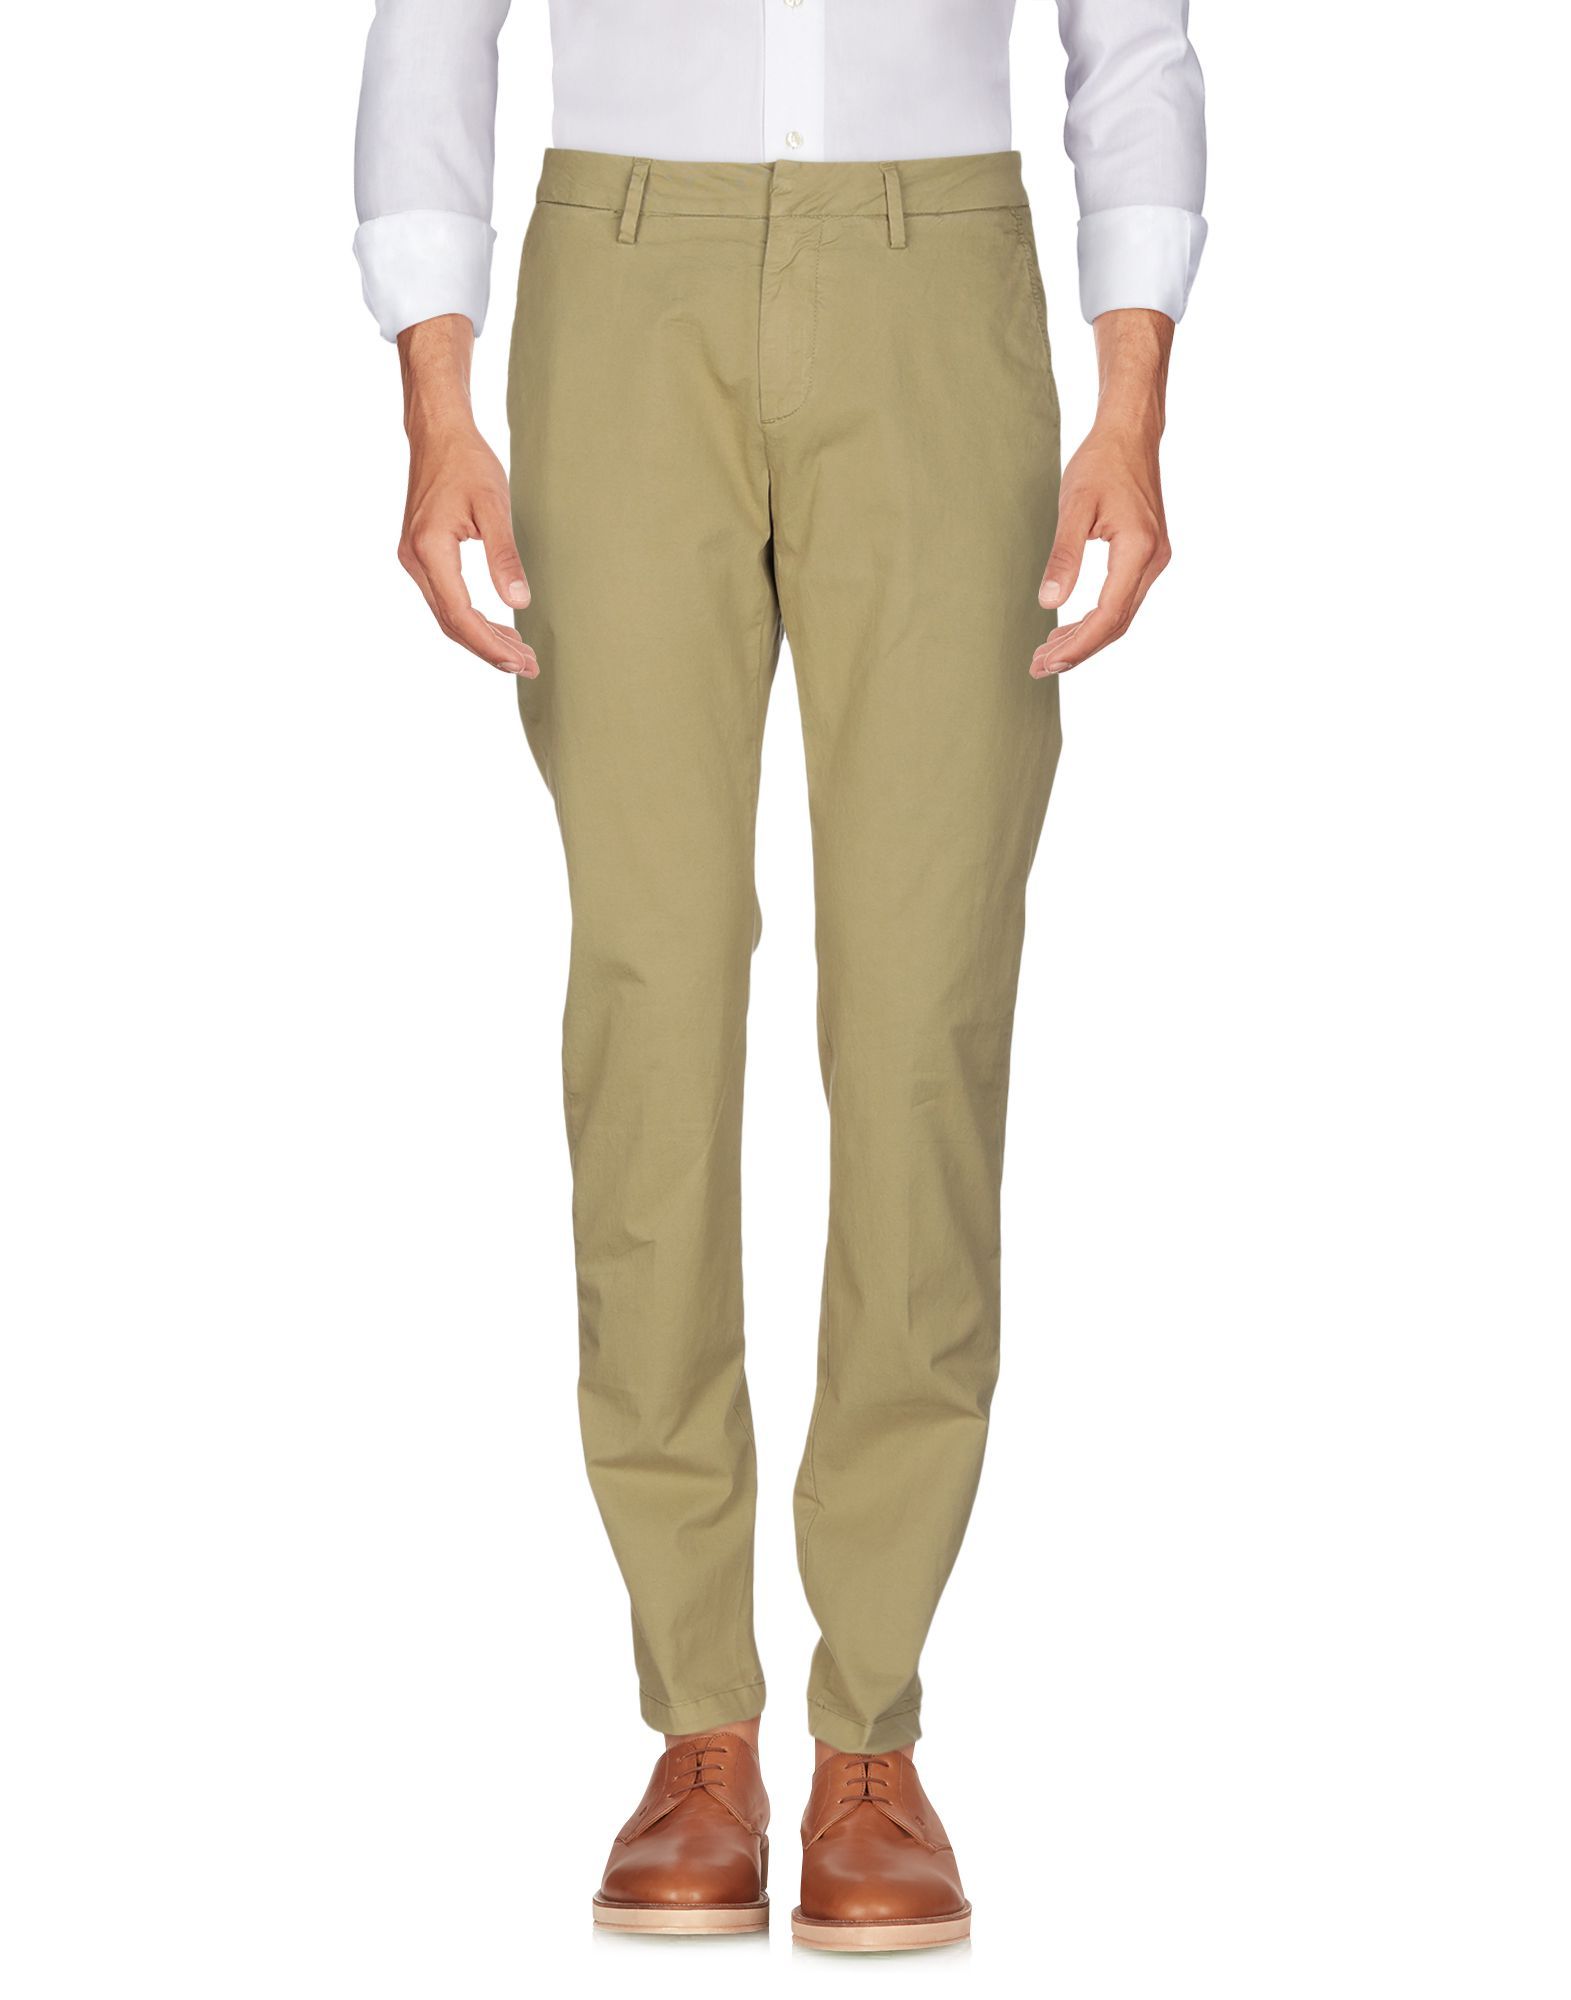 gabardine, solid colour, mid rise, slim fit, tapered leg, no appliqués, hook-and-bar, zip, multipockets, chinos, large sized